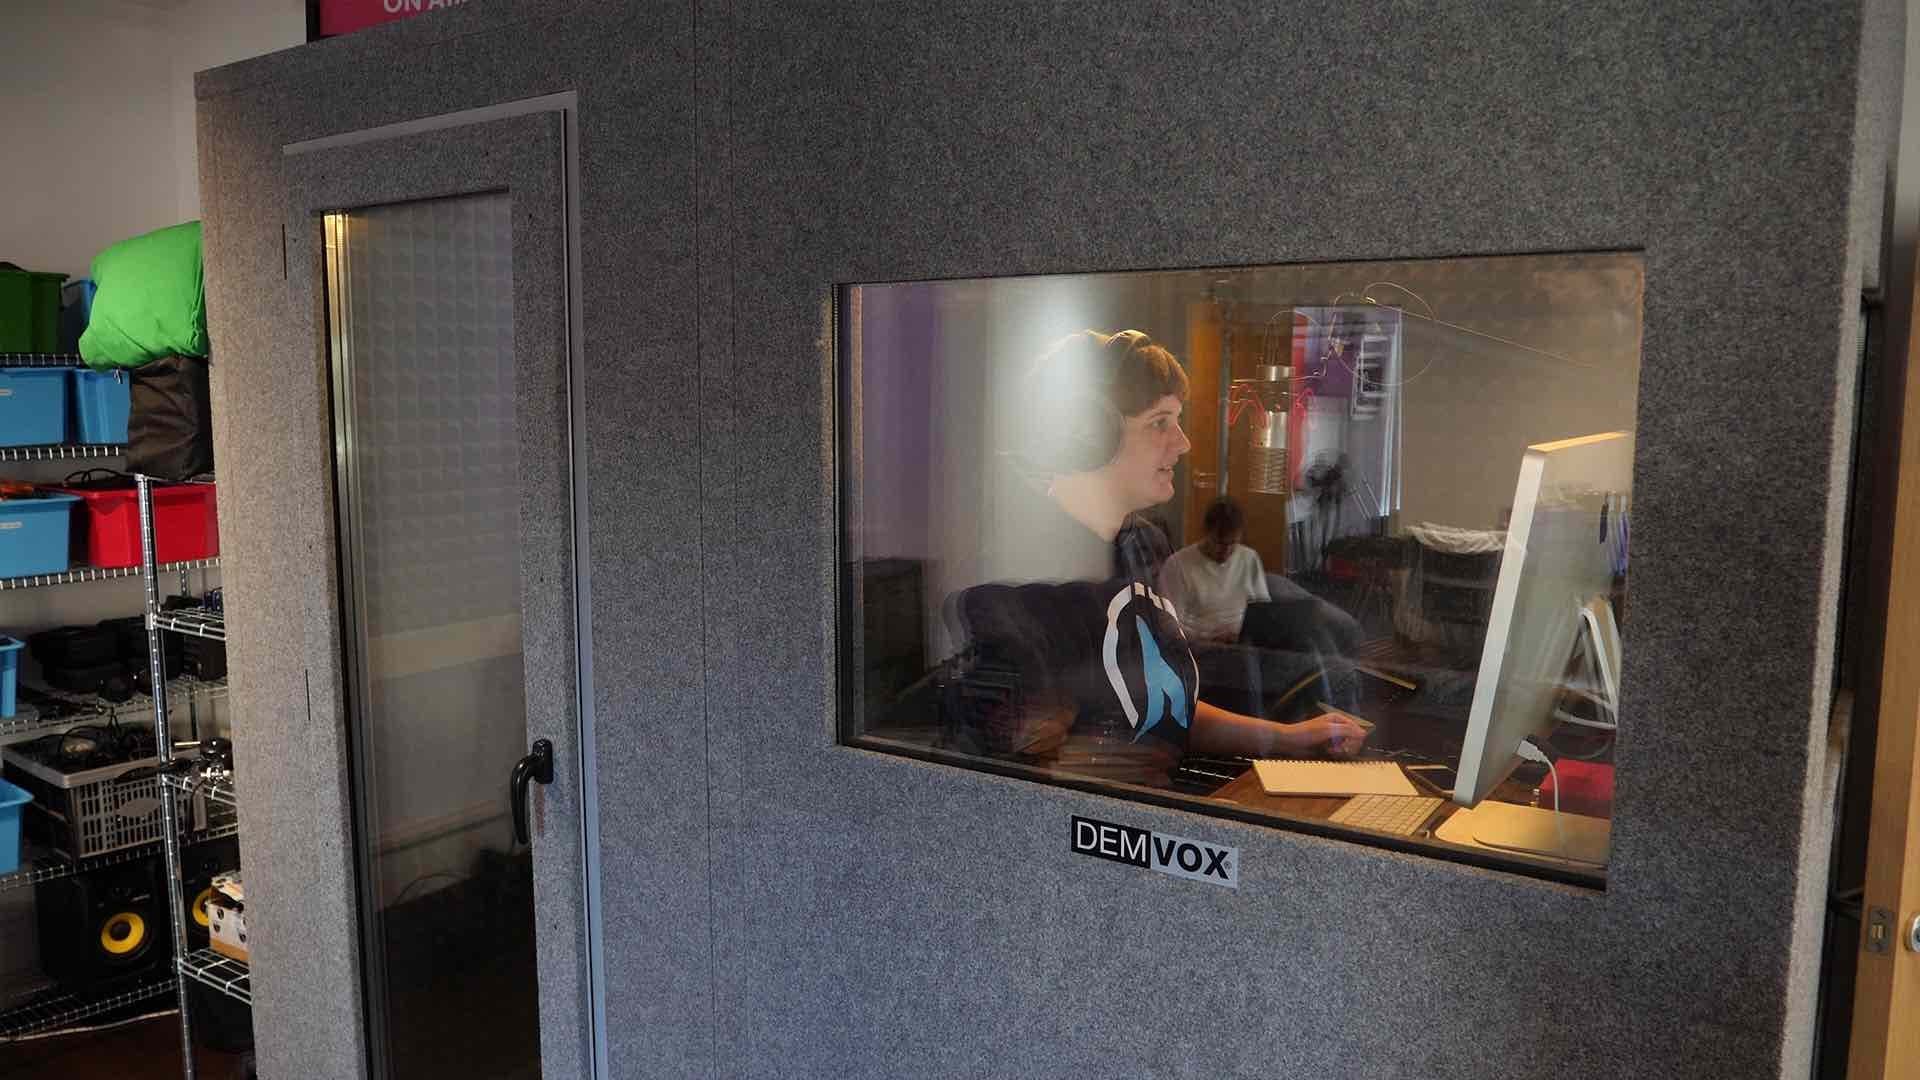 Image shows a stand alone radio booth, with one door and one window and a presenter in the booth speaking in a microphone.